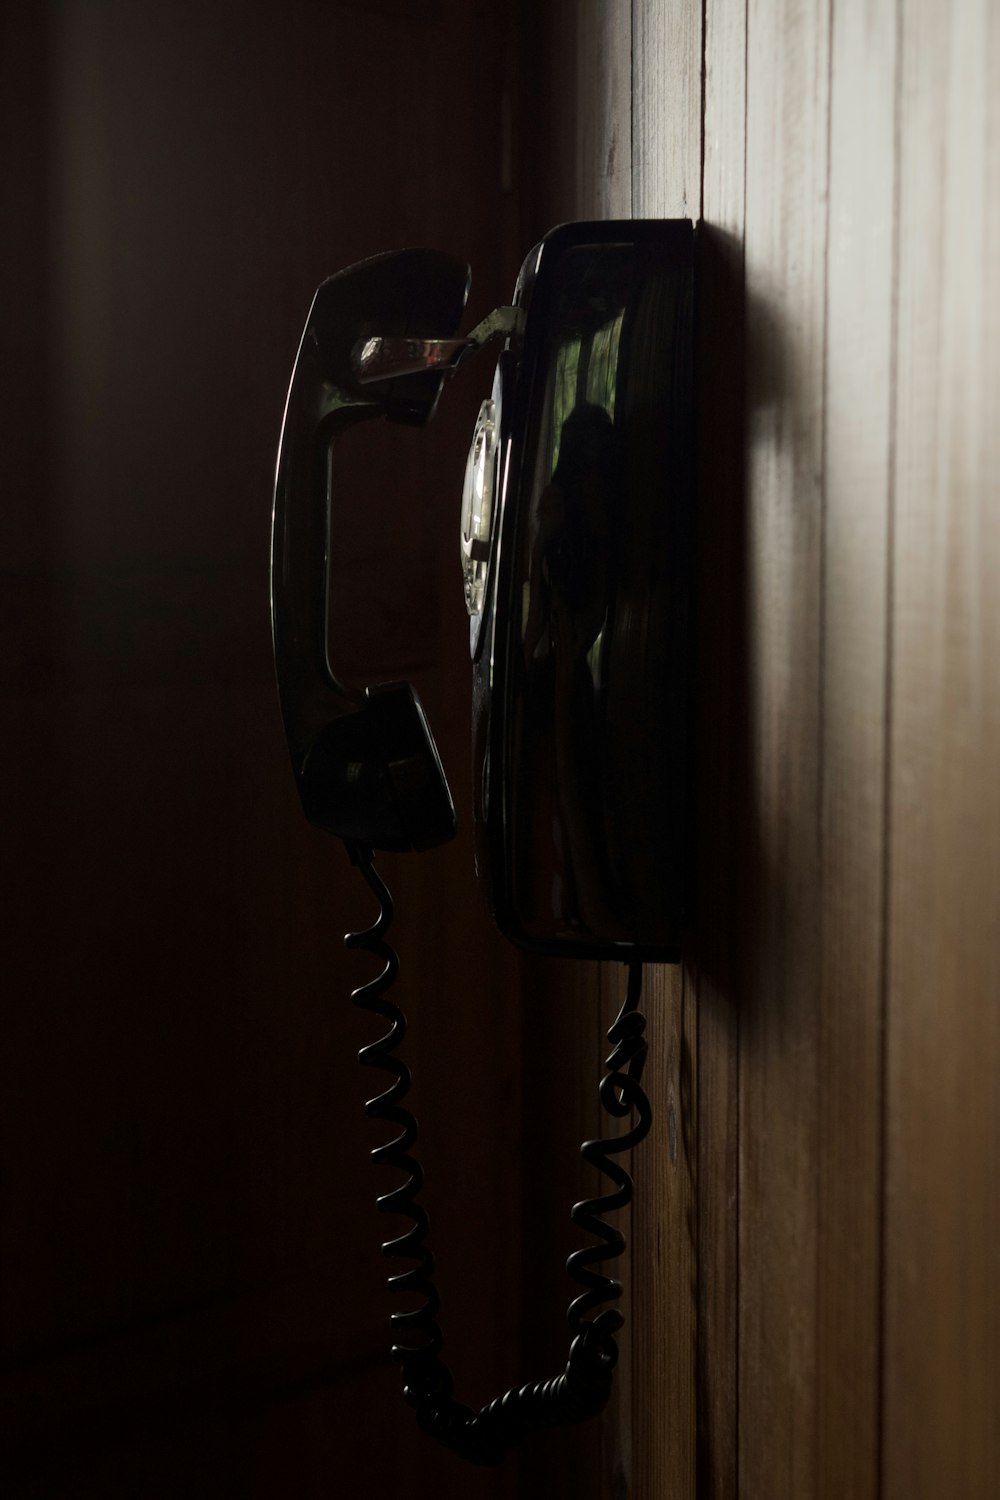 an old fashioned telephone hanging on a wooden wall